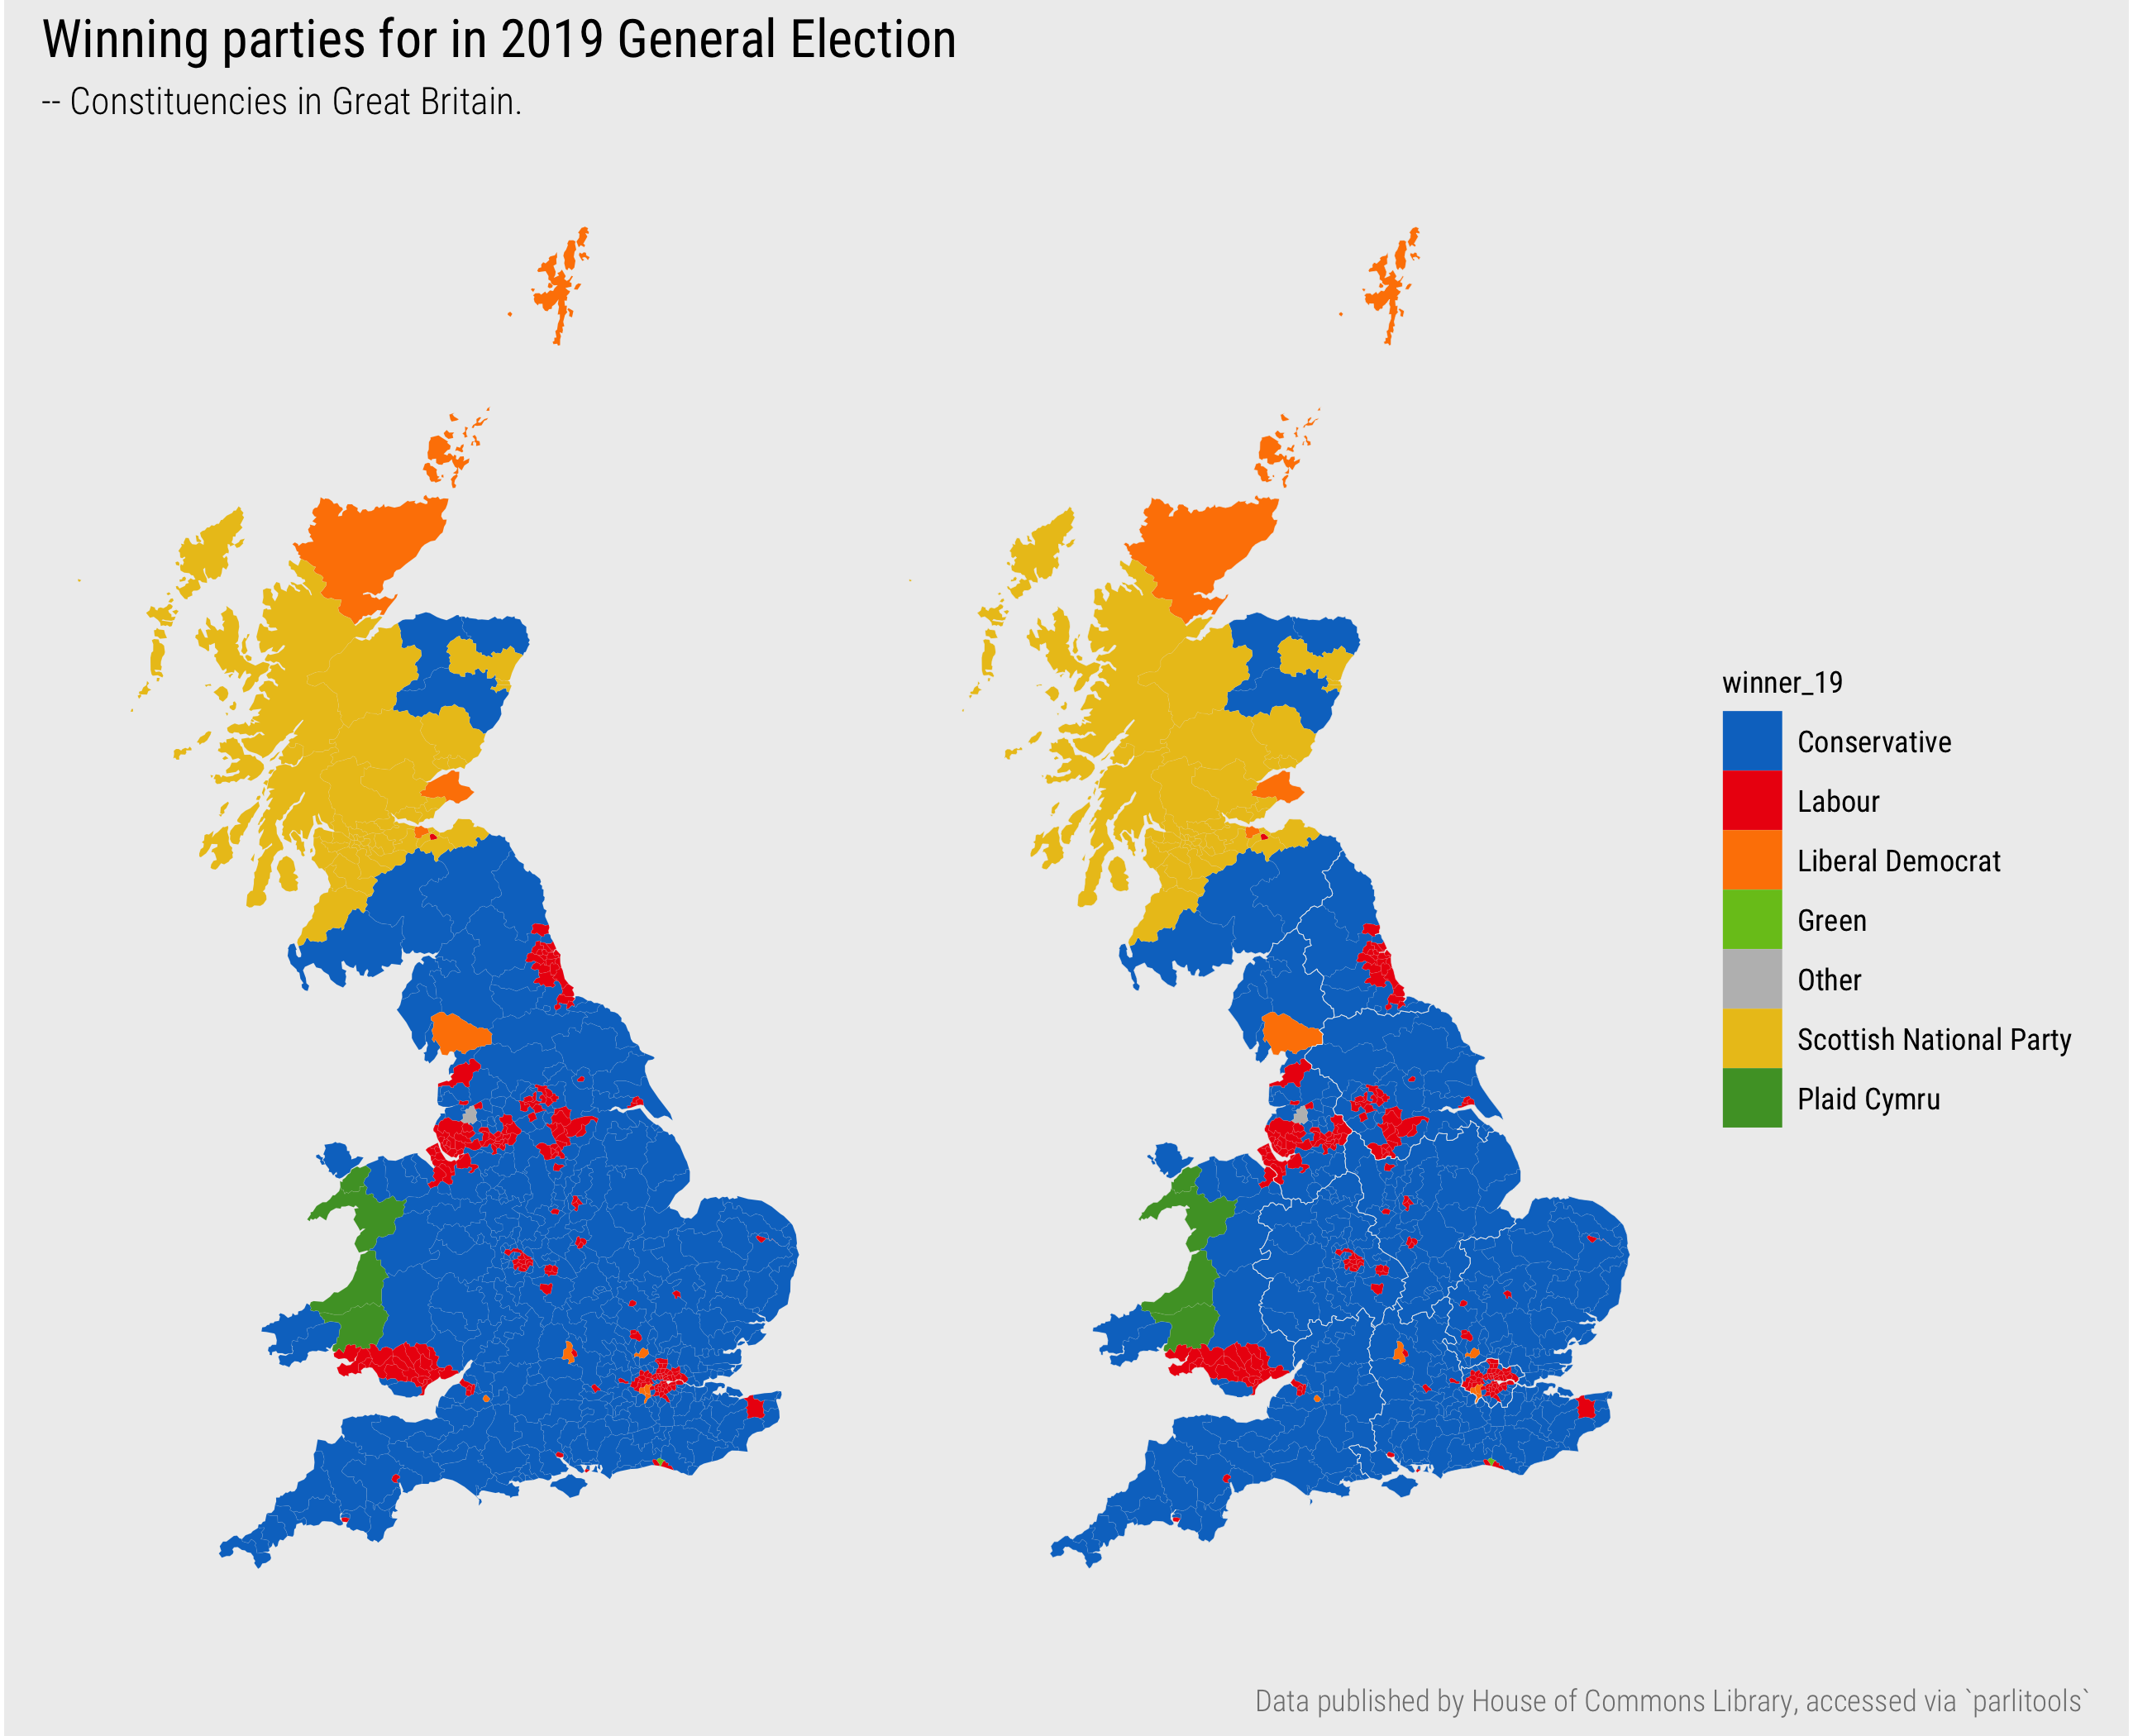 Choropleth of elected parties in 2019 General Election.